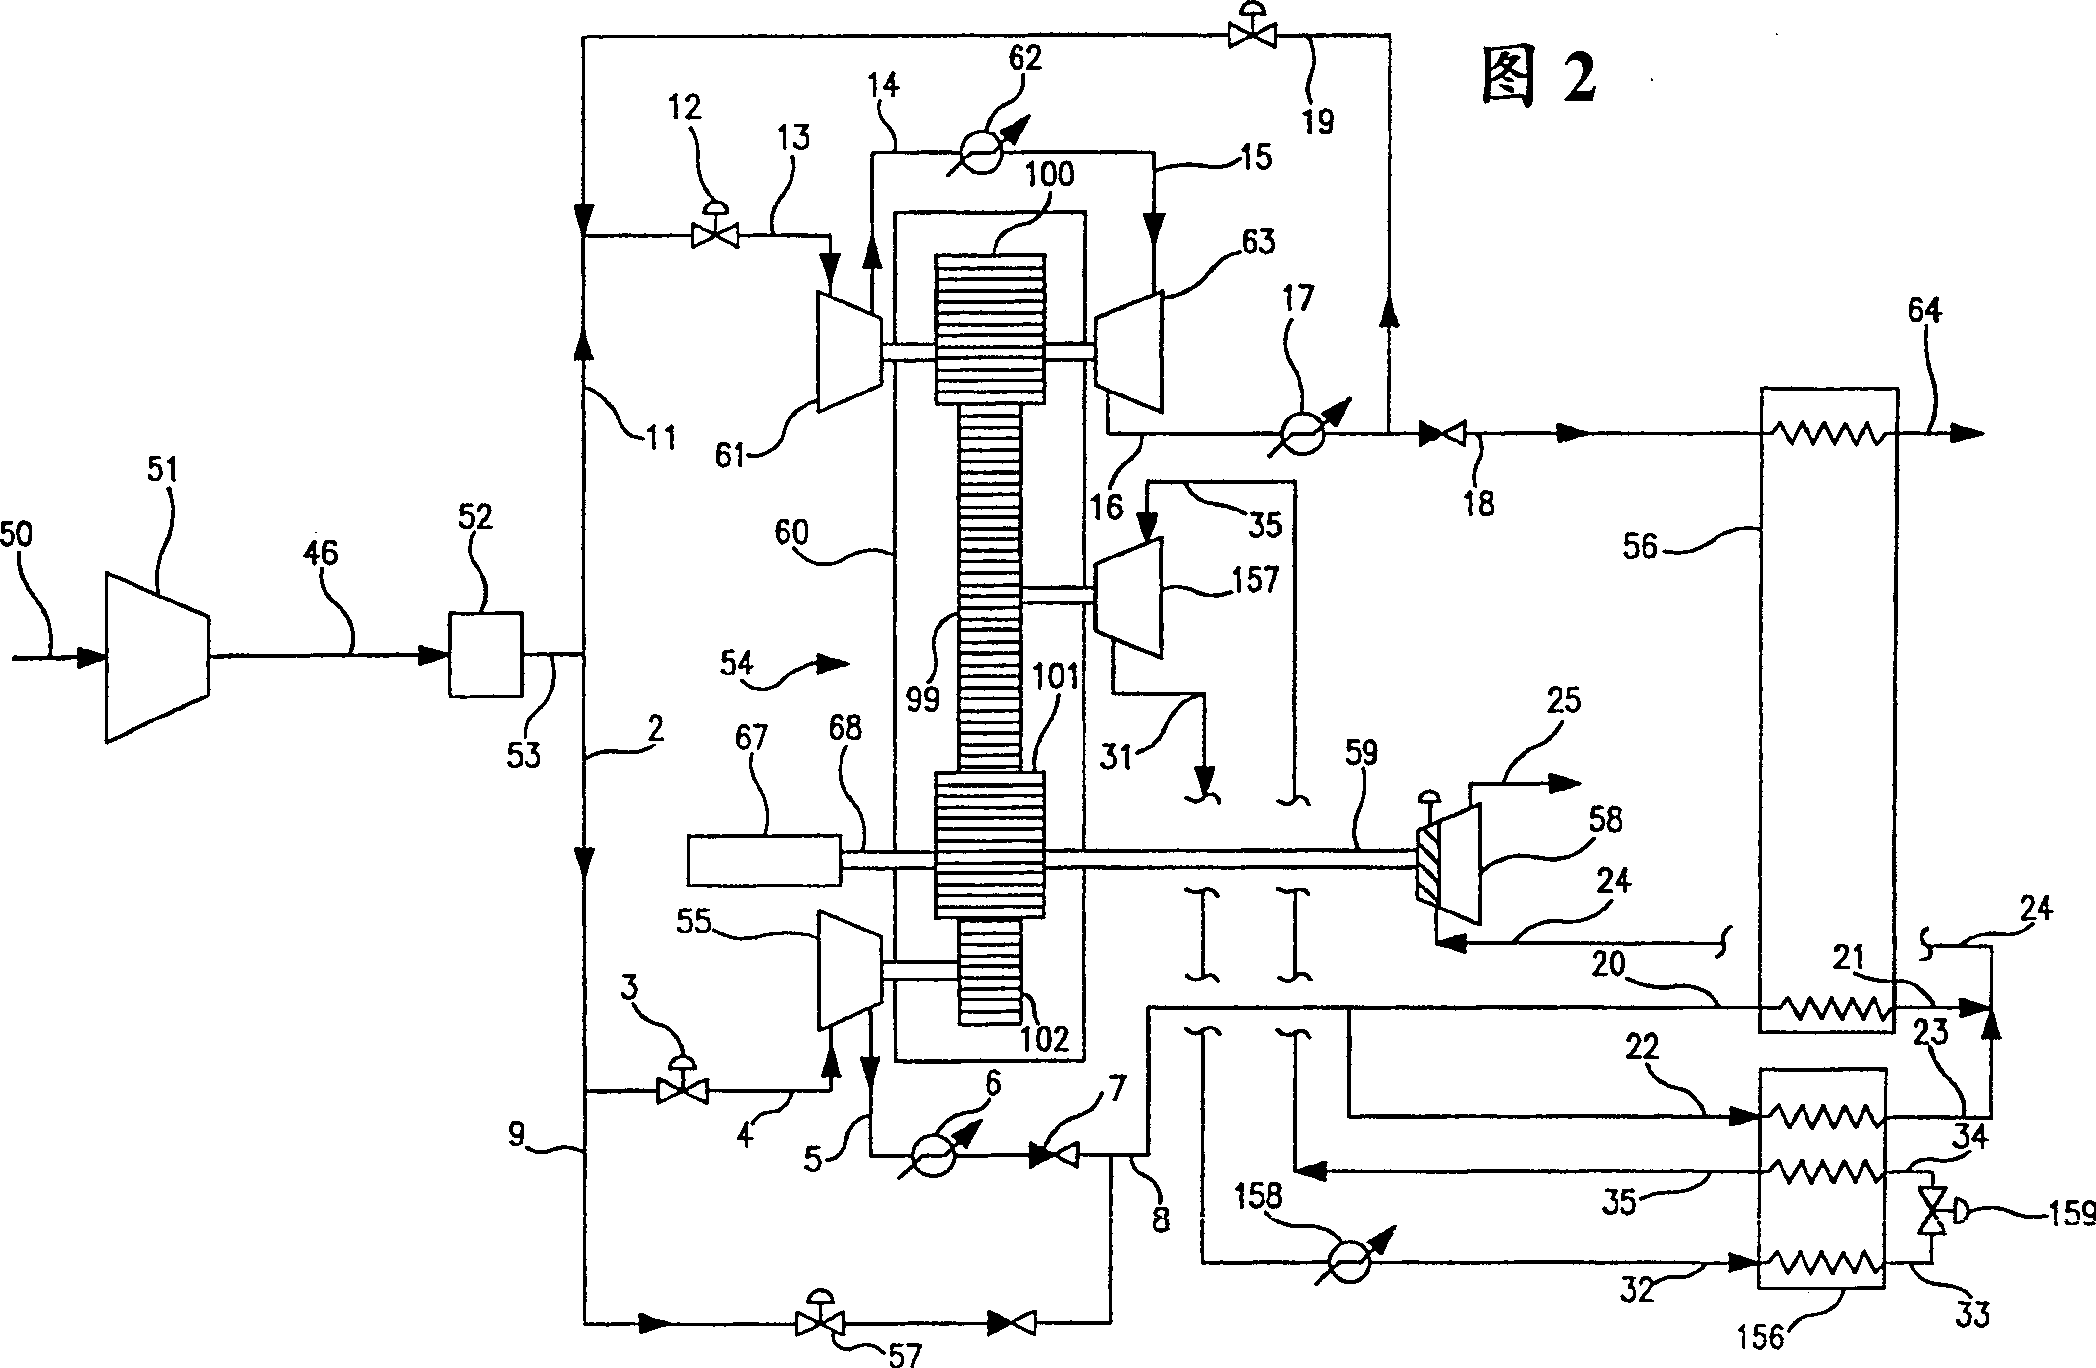 Low temp air separation system adopting integrated pressurizing compression and multiple group sub-refrigerating compression